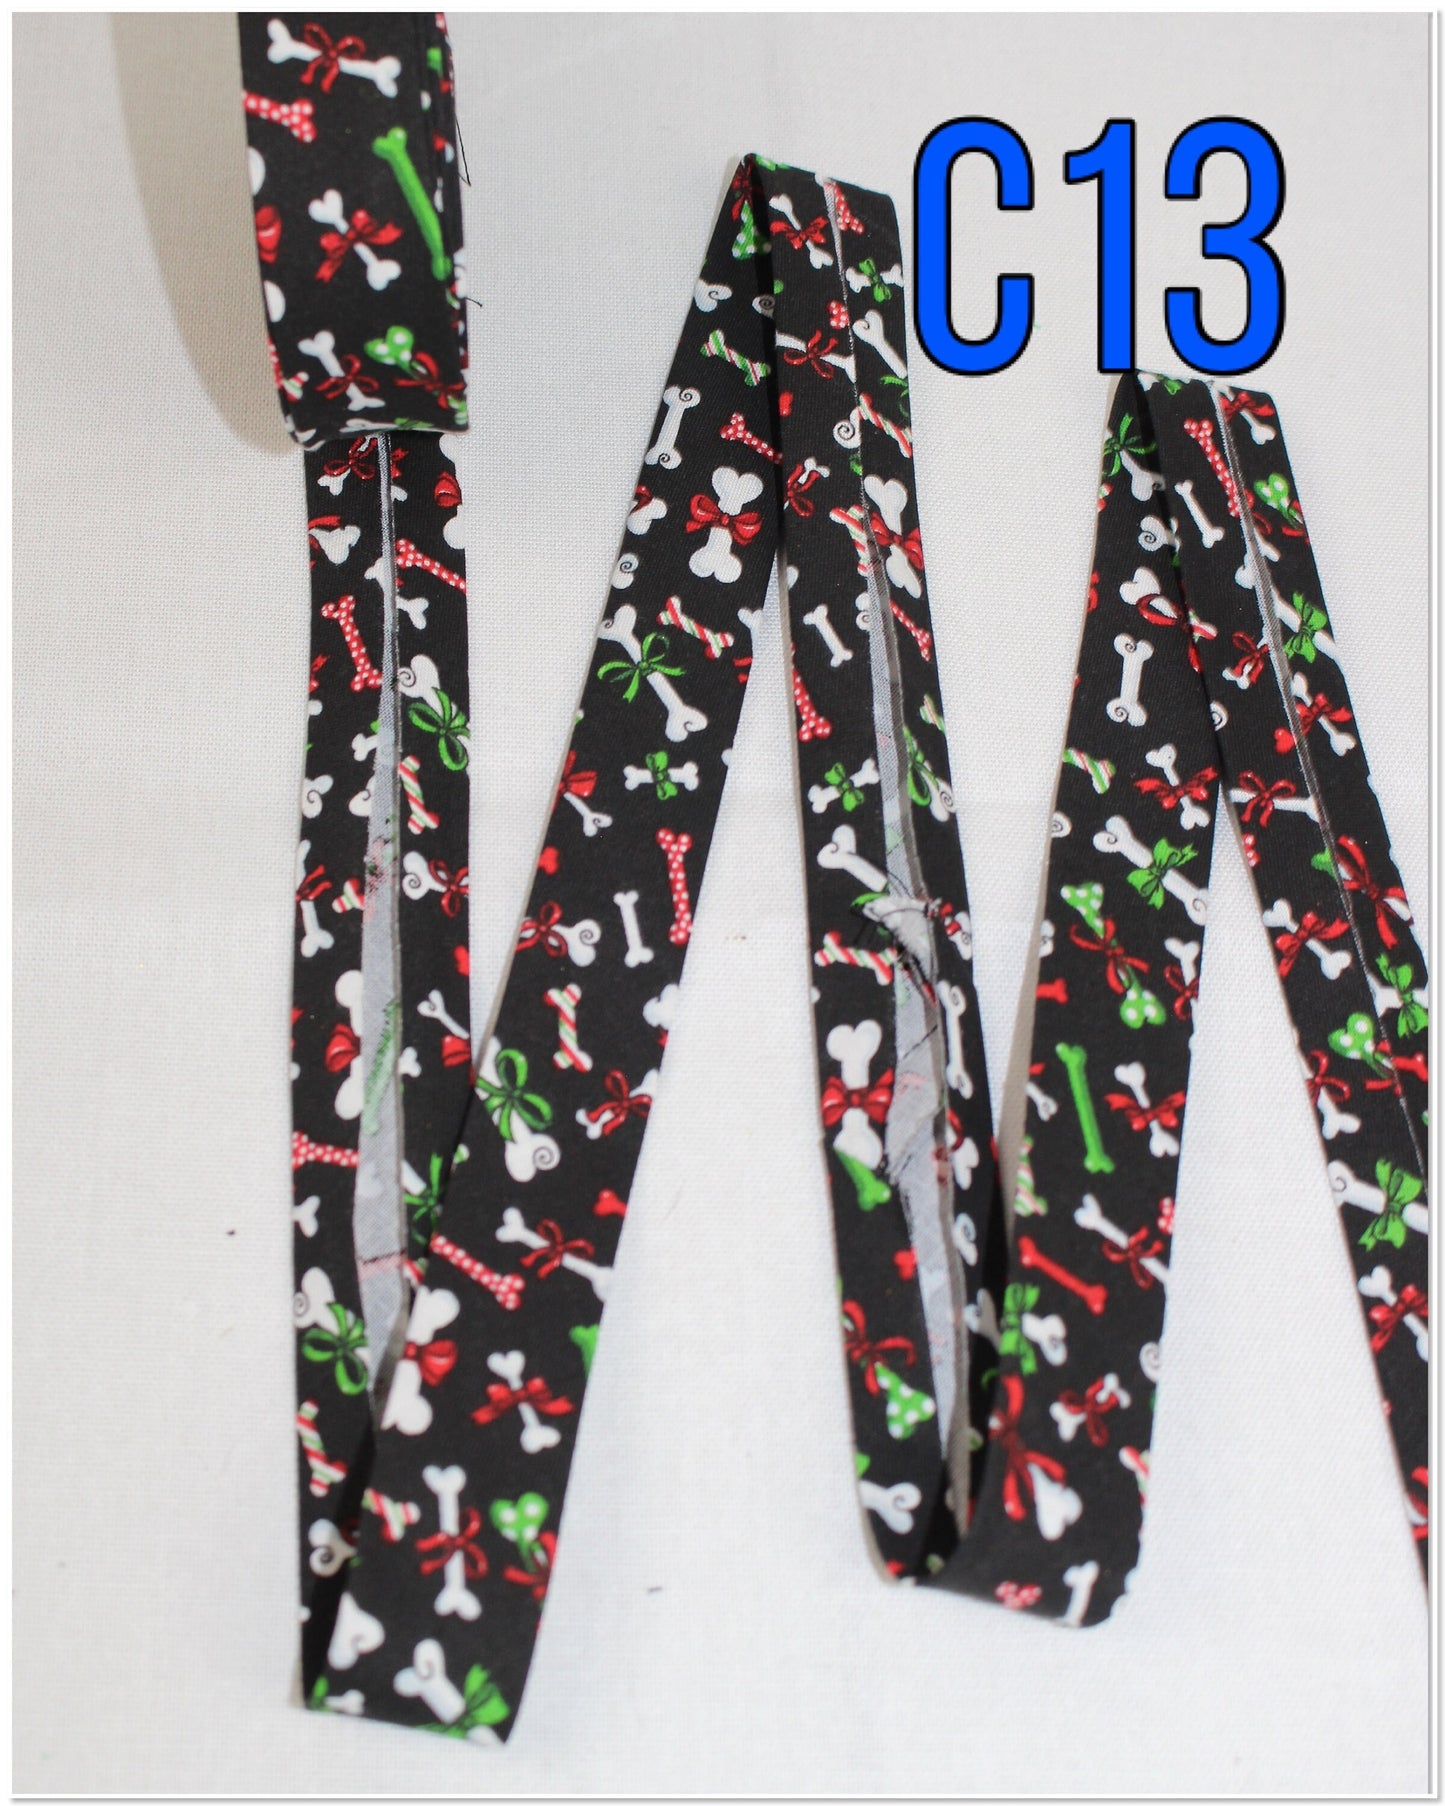 Christmas bias tape binding/(fusible iron on available)/single fold 1 inch wide (1m) - baubles/bones/Christmas lights/